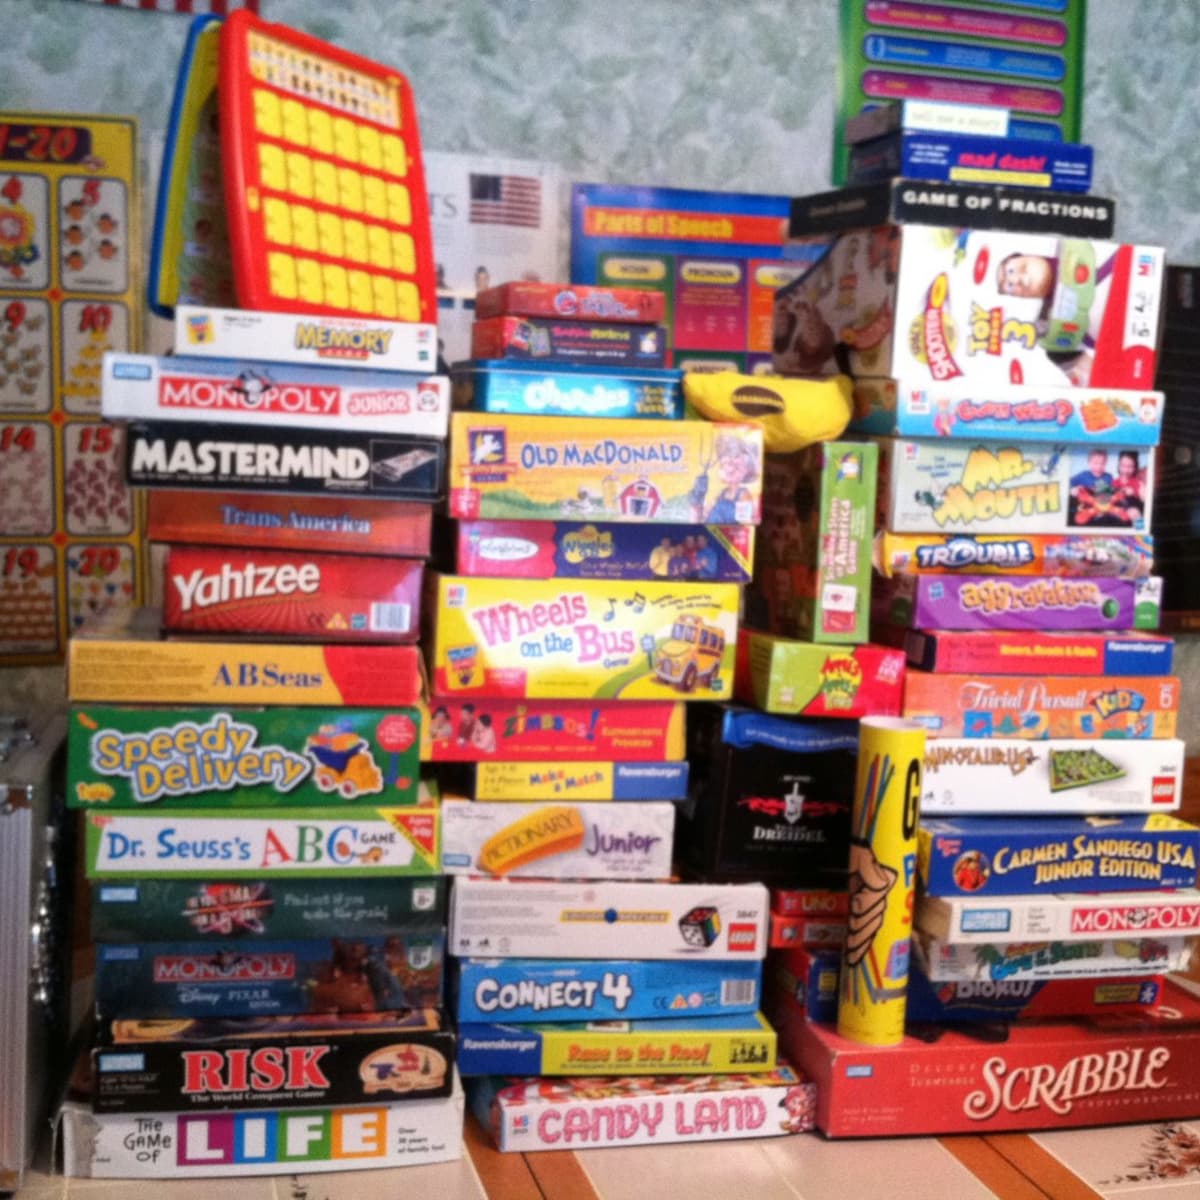 Top 50 Board Games of ALL-TIME!